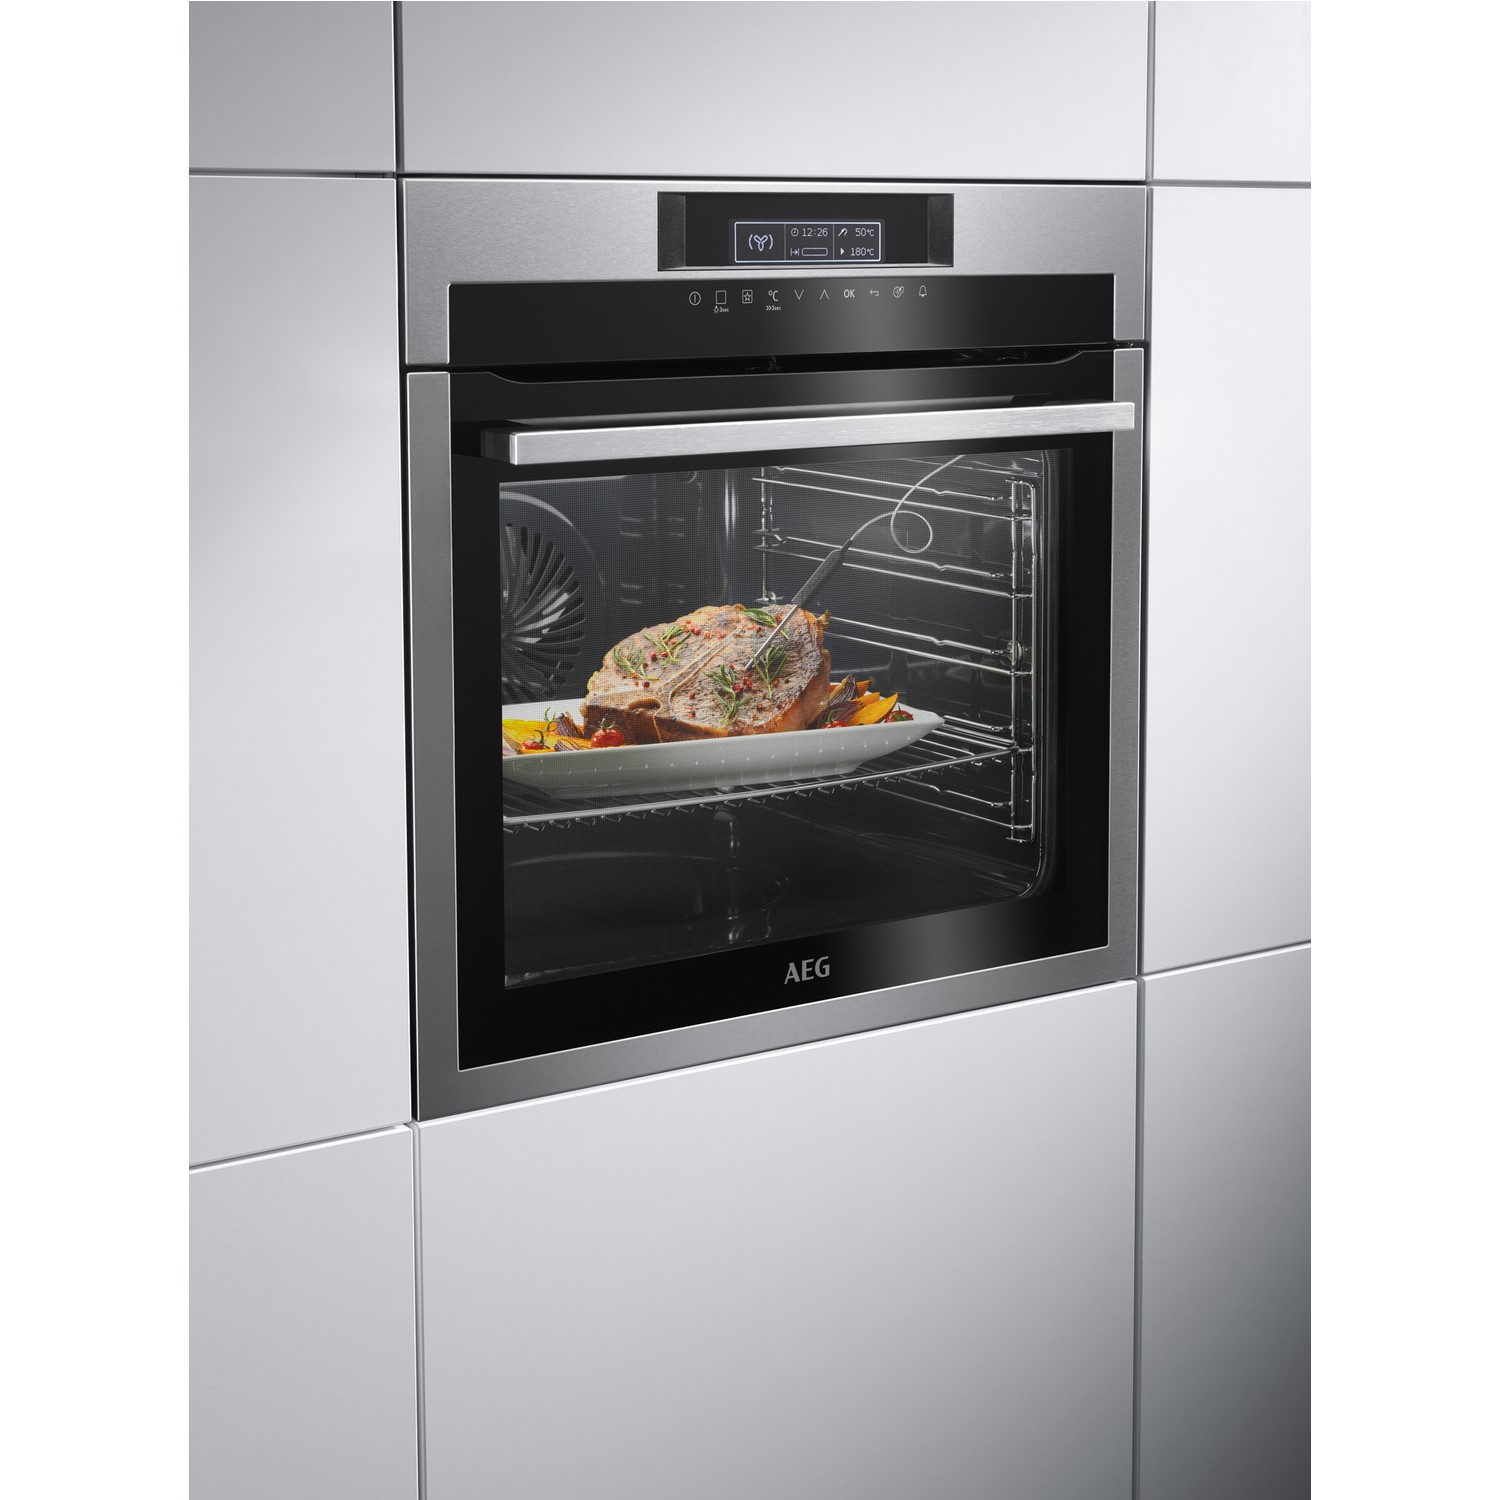 AEG AEG BPK742320M Pyrolytic Built-In A Rated Electric Single Oven with Food Sensor 